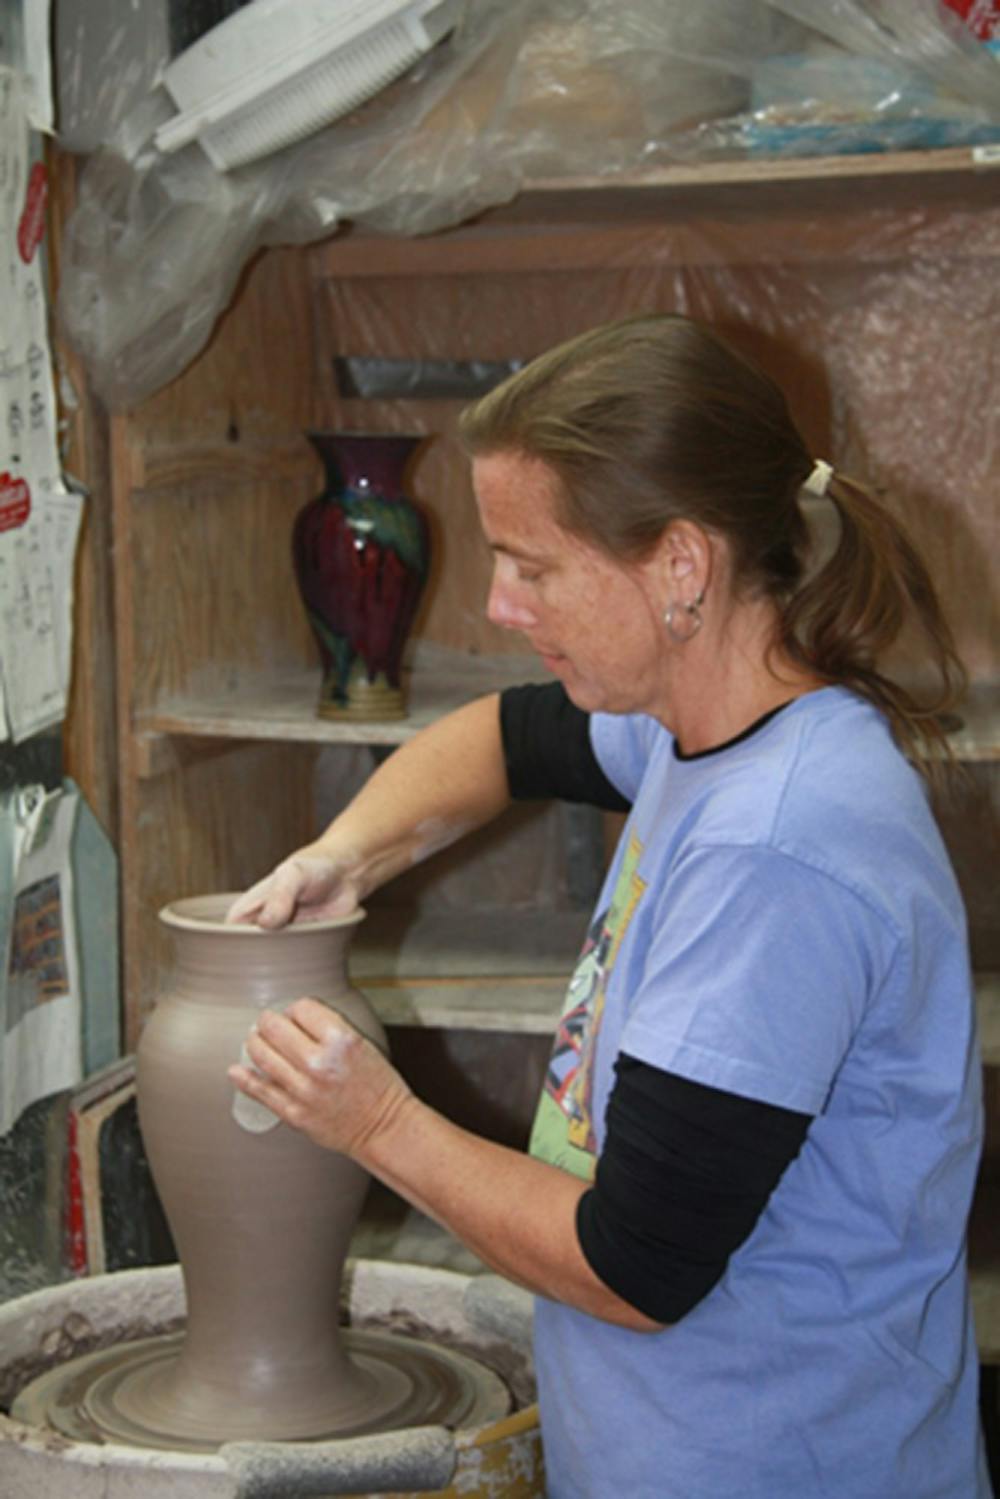 Kris Busch works on a pottery wheel before the Artisan Guild show. The Artisan Guild is currently preparing for a show at the Bloomington Convention Center on Friday from 4 p.m. to 9 p.m.